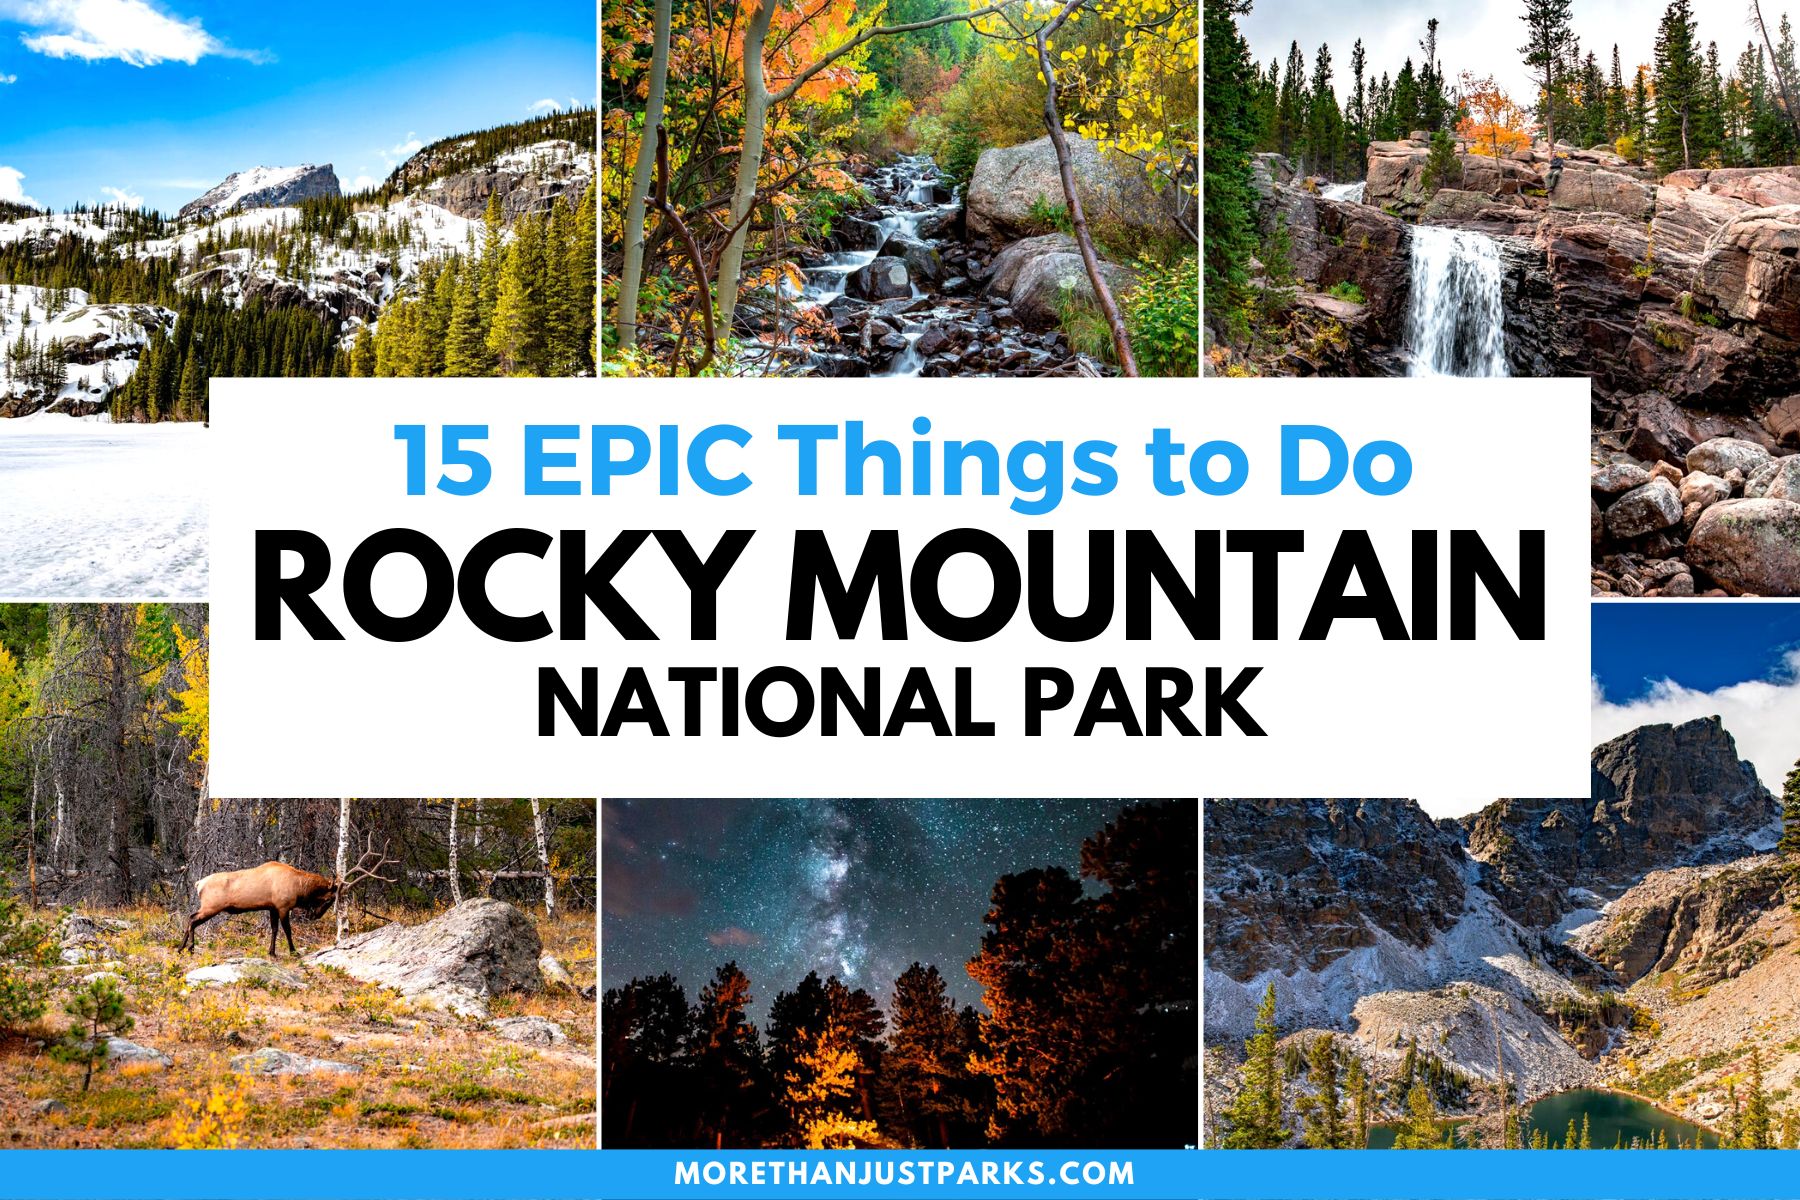 things to do in rocky mountain national park colorado, rocky mountain national park activities